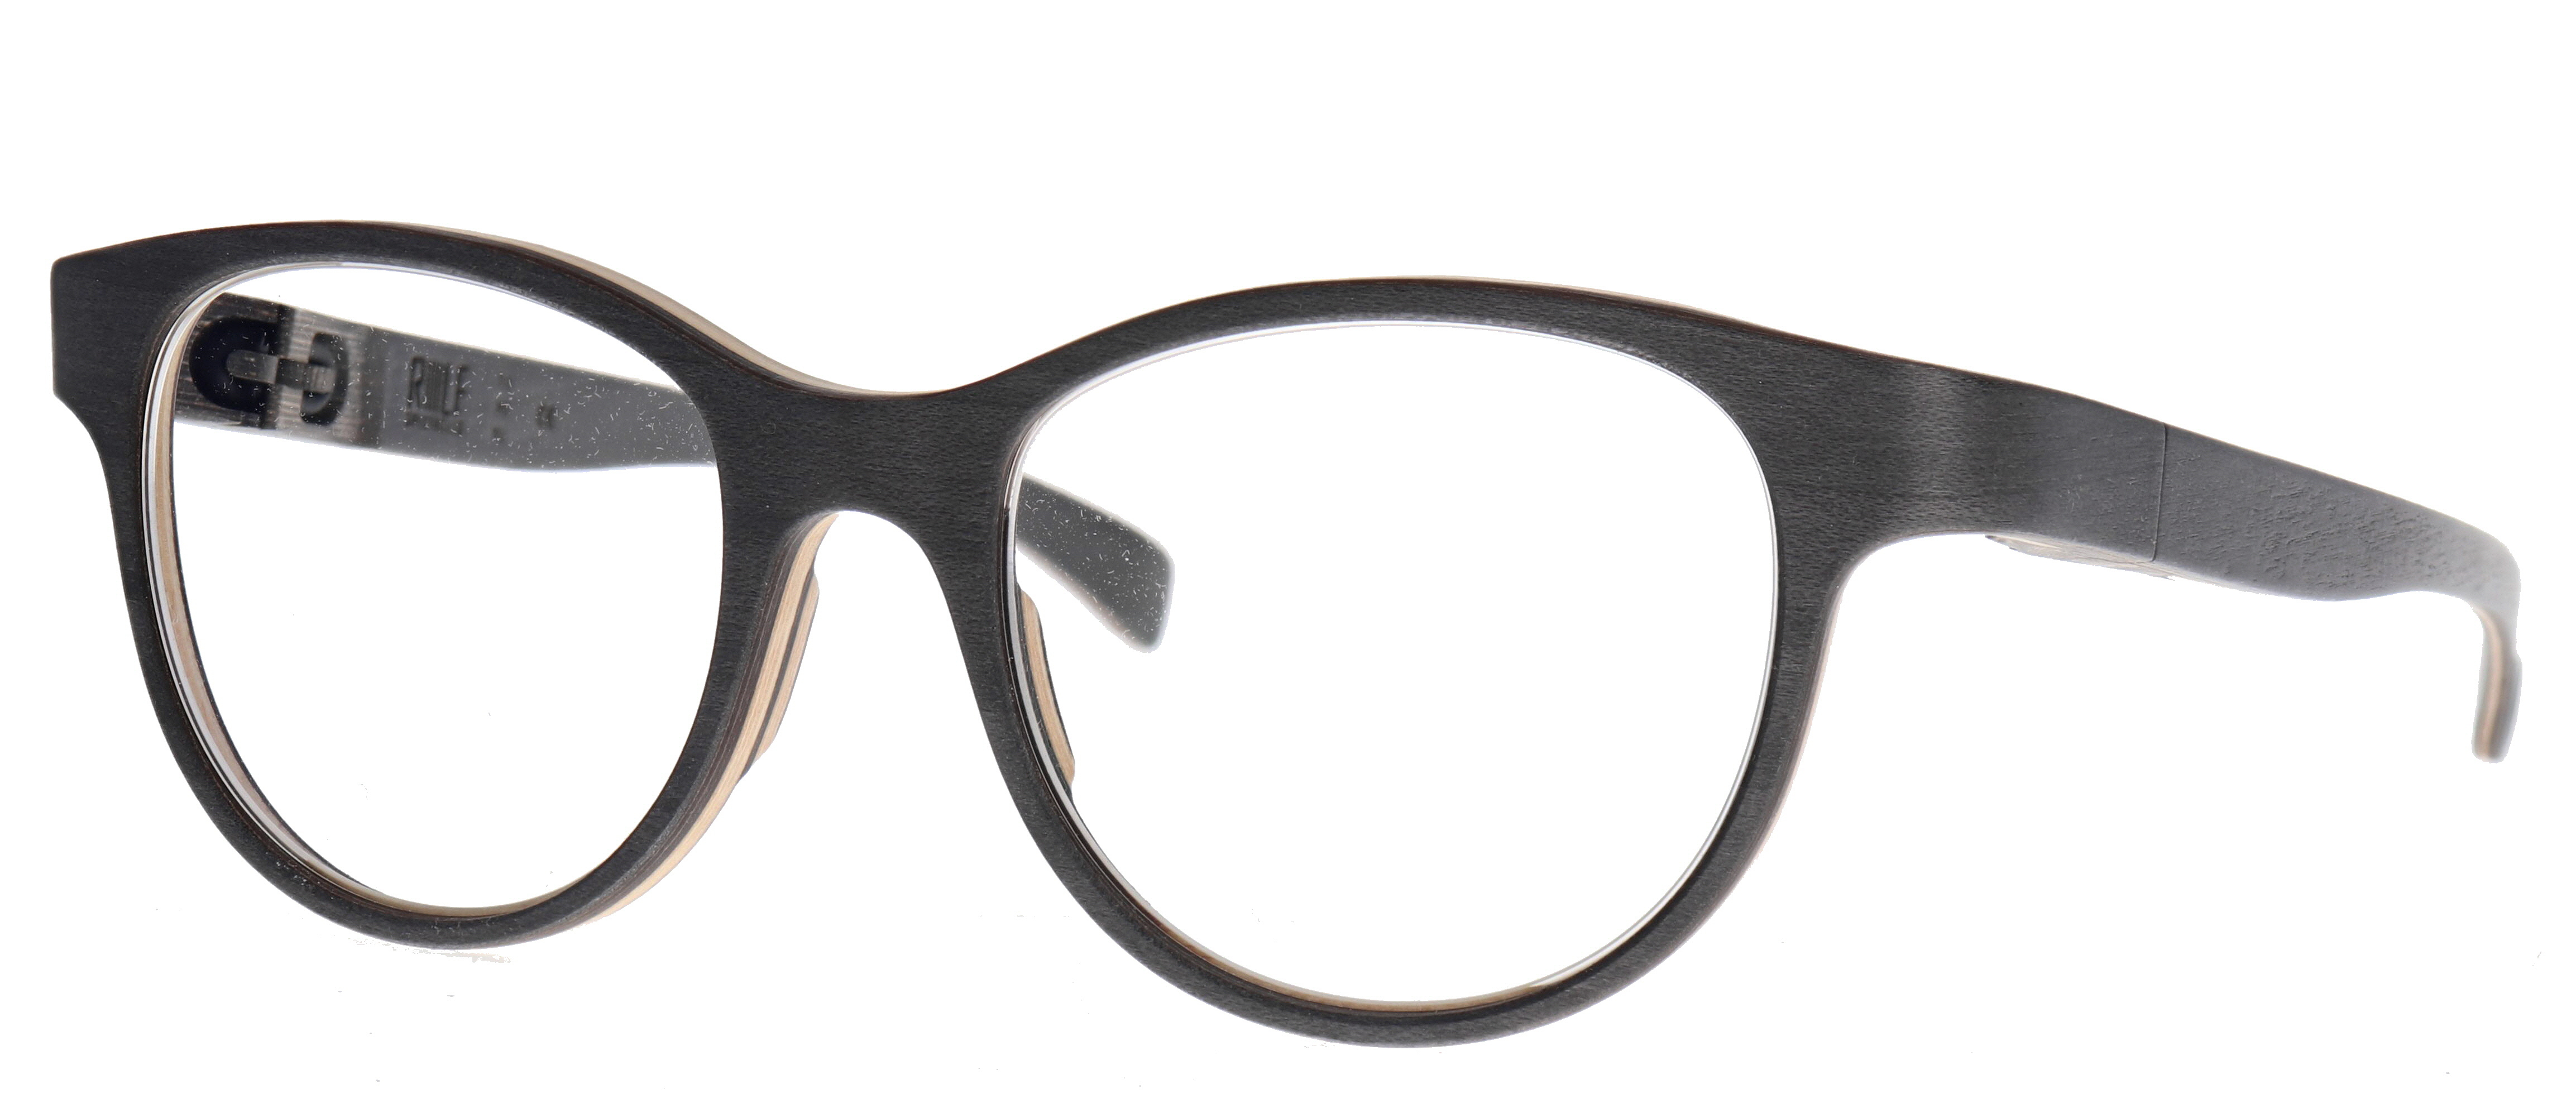 Rolf Spectacles Velox